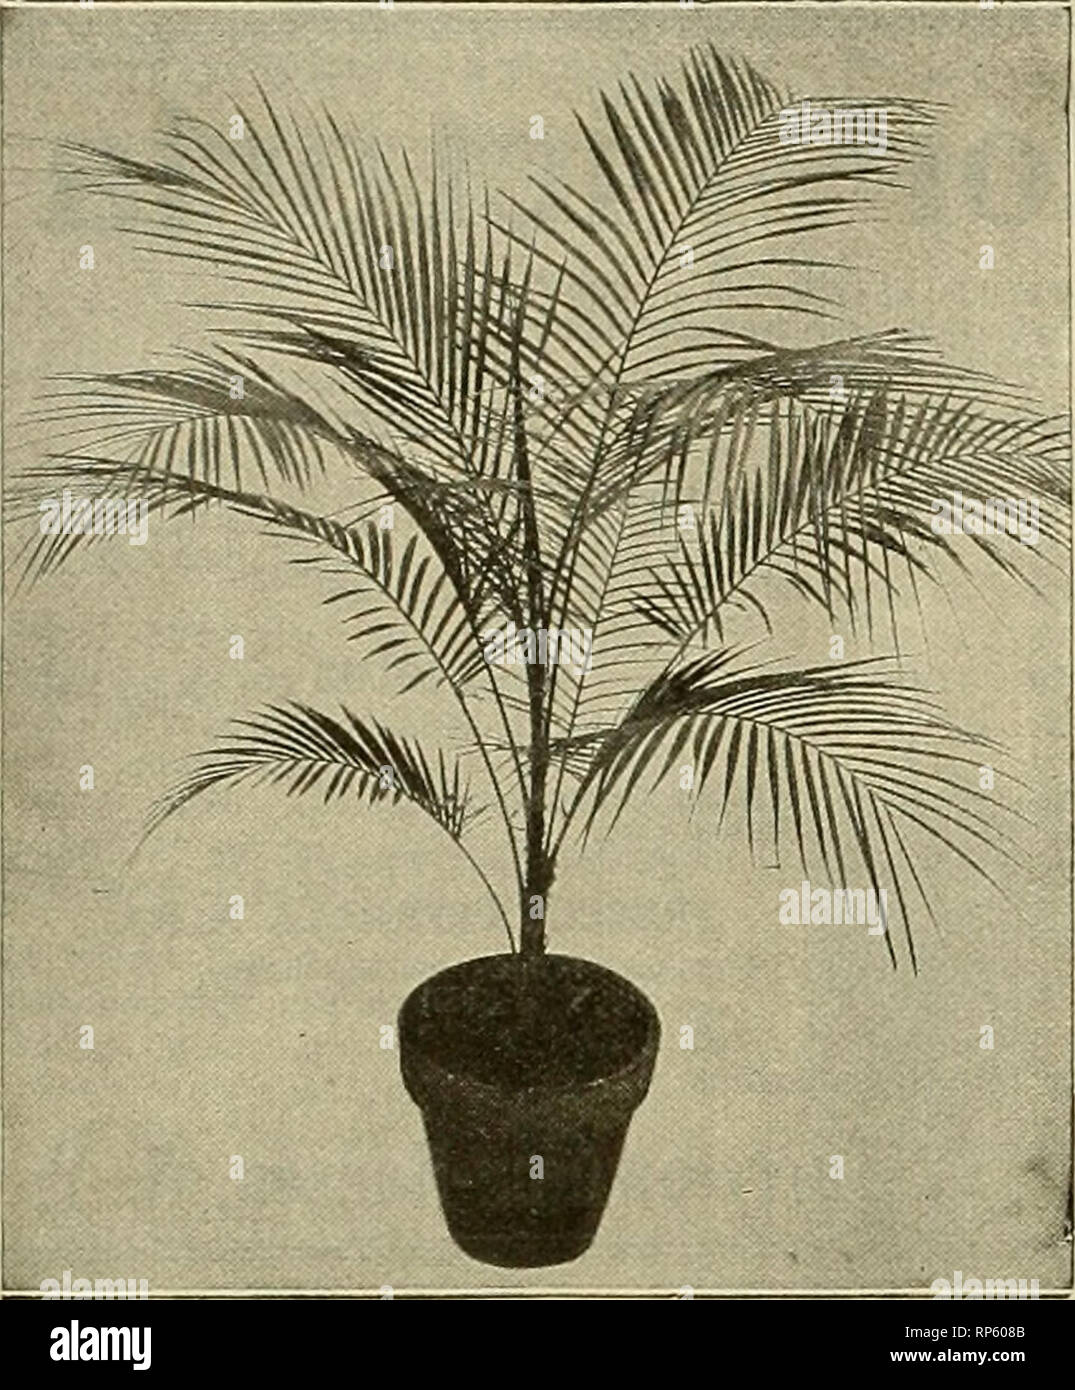 . The American florist : a weekly journal for the trade. Floriculture; Florists. 778 The American Florist Nov. 6,. Cocos Weddelliana We are sending out at the present time a splendid lot Of Cocos Weddelliana, in 5-incIi pots, at $1.00 each, perfect stock, of a rich dark green color, 18 to 24 inches high, just the sort of plants to appeal to your customer for house decoration. Nay We Send You a Trial Lot of These? For a full and complete list of Seasonable, Decorativc and other stock, see our current wholesale list. HENRY A. DREER 714 Chestnut St., PHILADELPHIA, PA. Cincinnati. STOCK AND PEICES Stock Photo